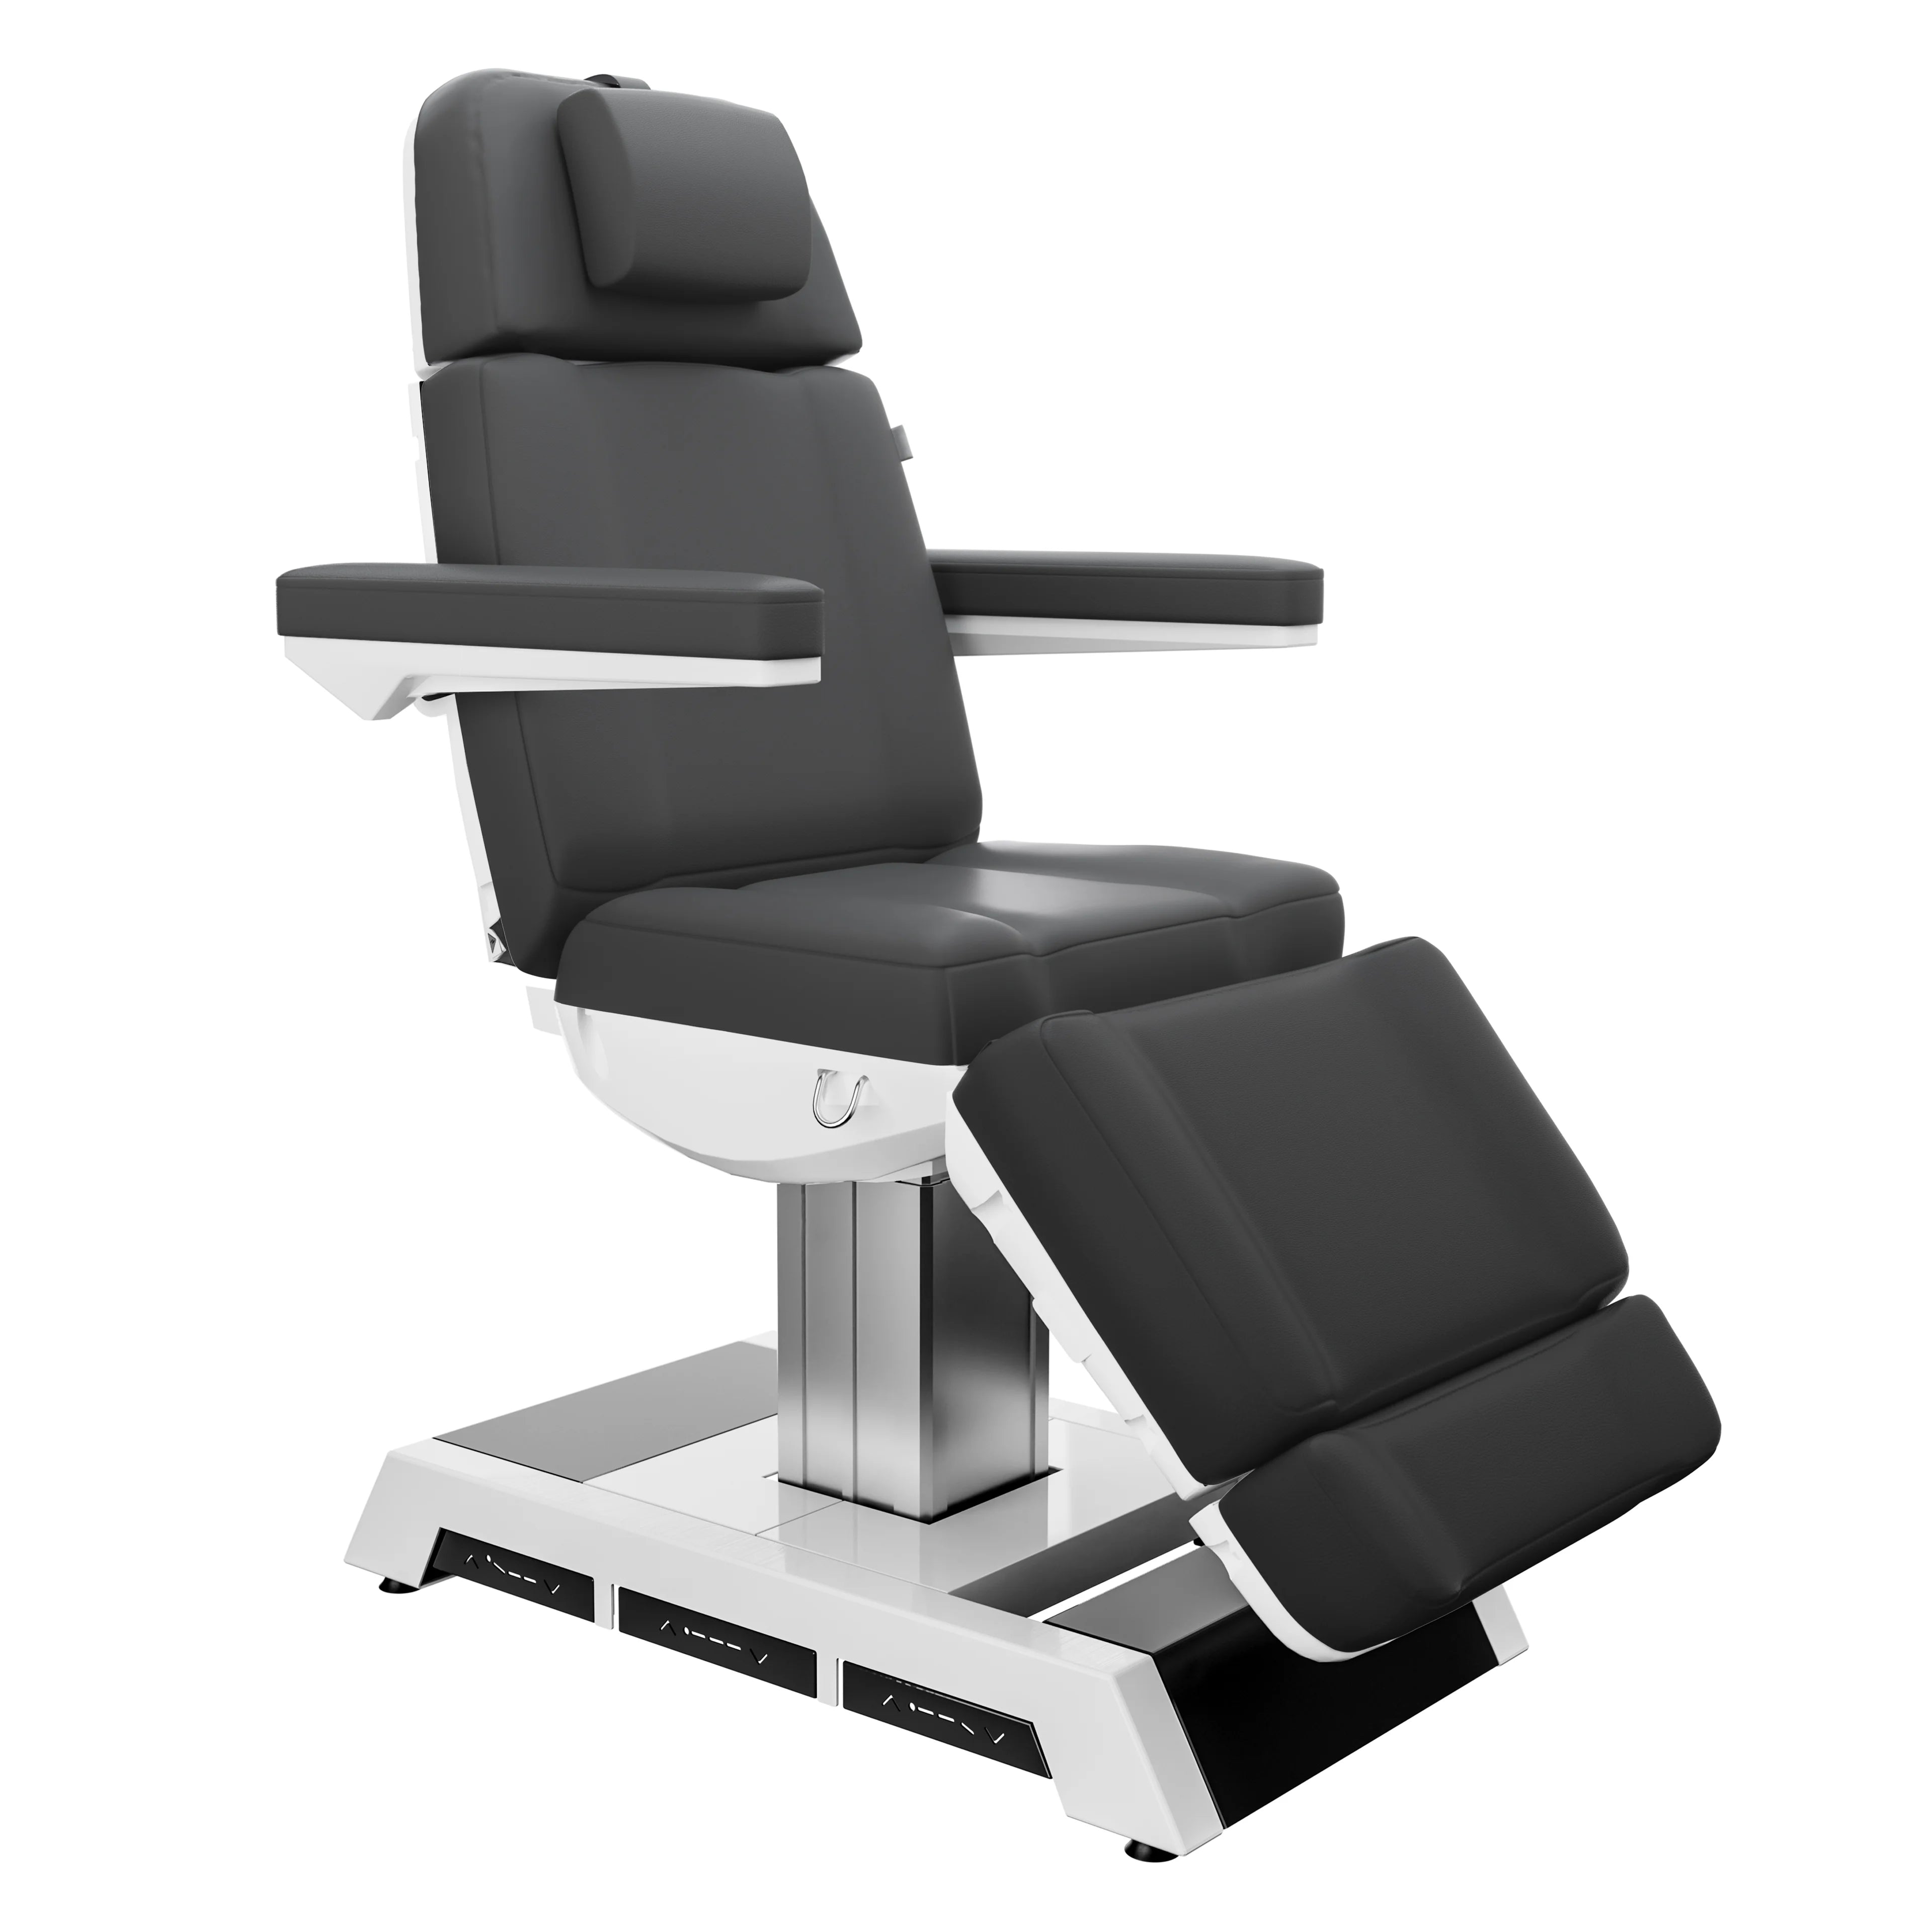 SpaMarc . Adones (Gray) . 4 Motor Spa Treatment Chair/Bed